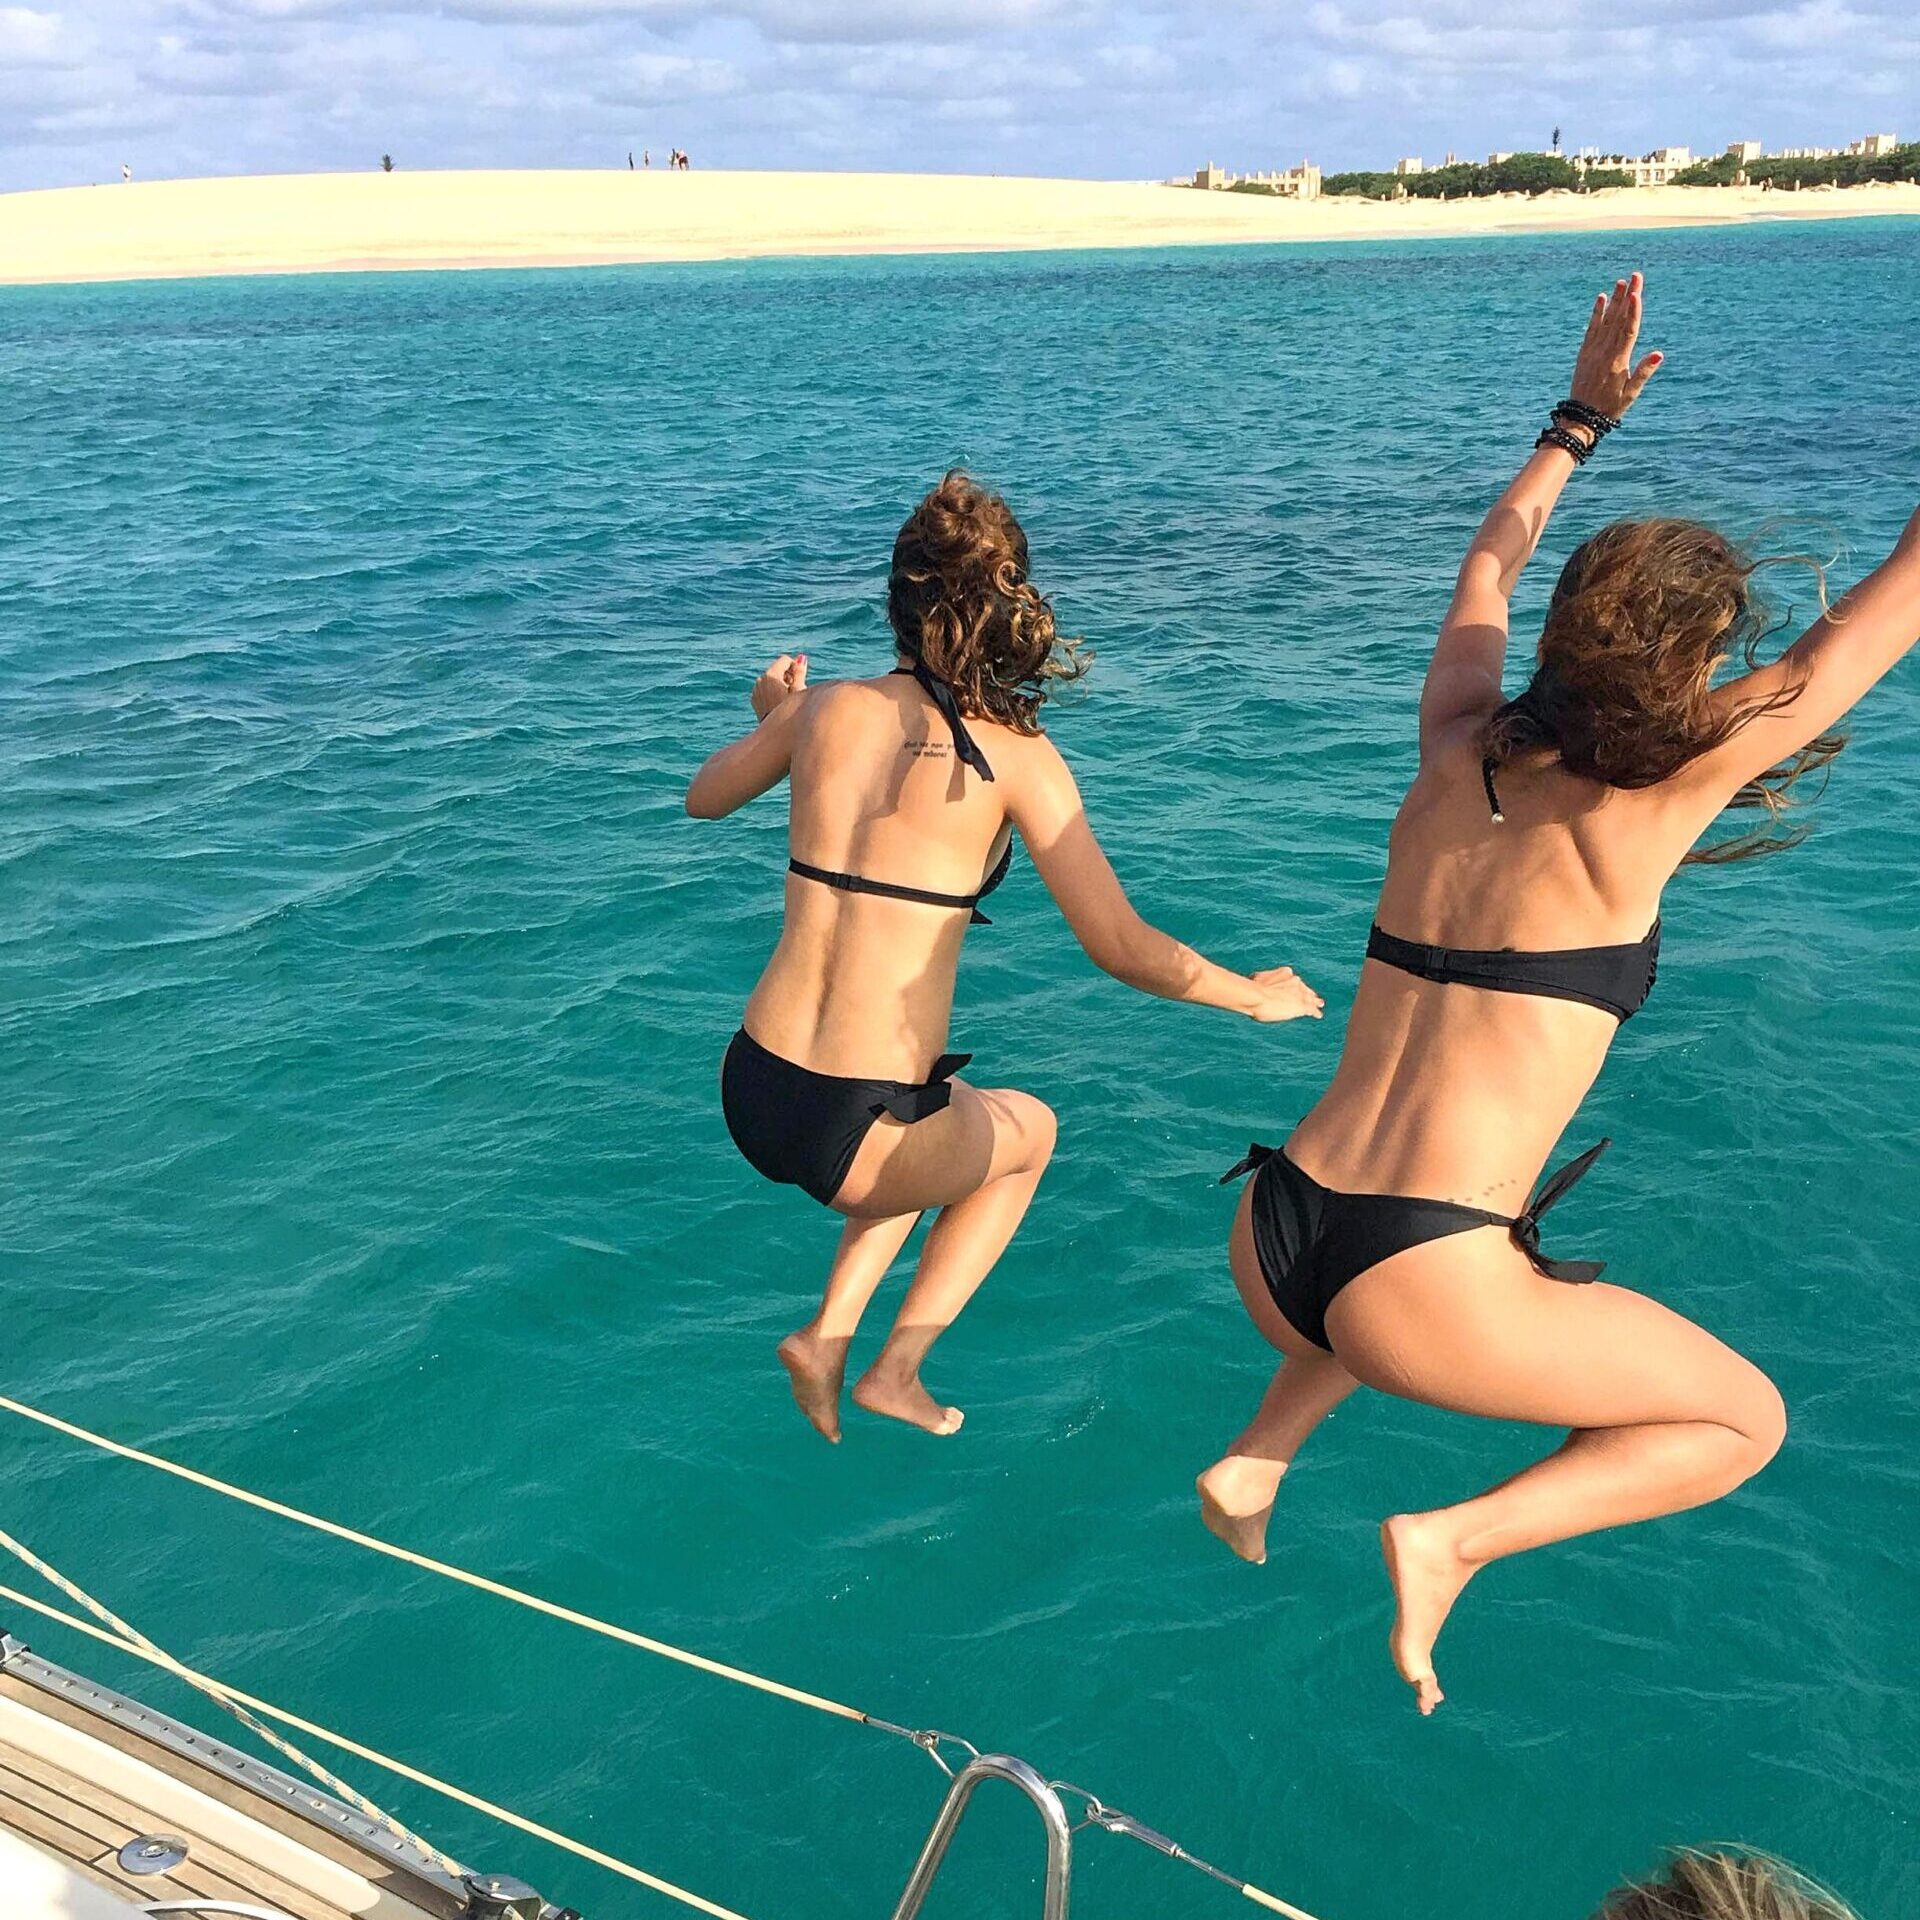 some girls are jumping from the boat during a sailing trip